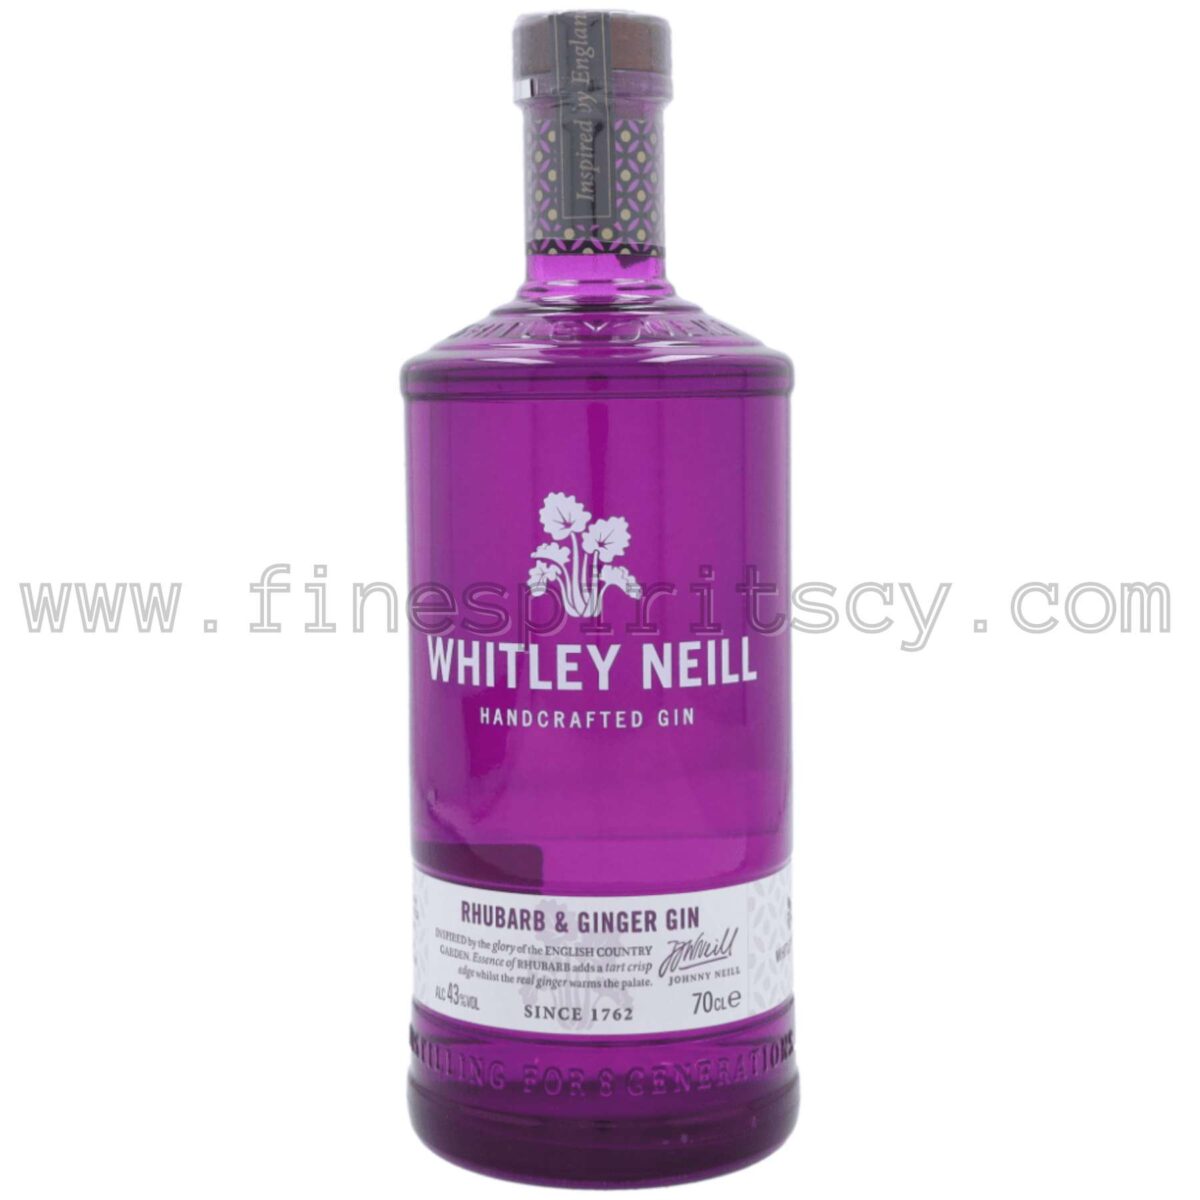 Whitley Neill Rhubarb & Ginger Gin Price Cyprus 700ml 70cl 0.7L